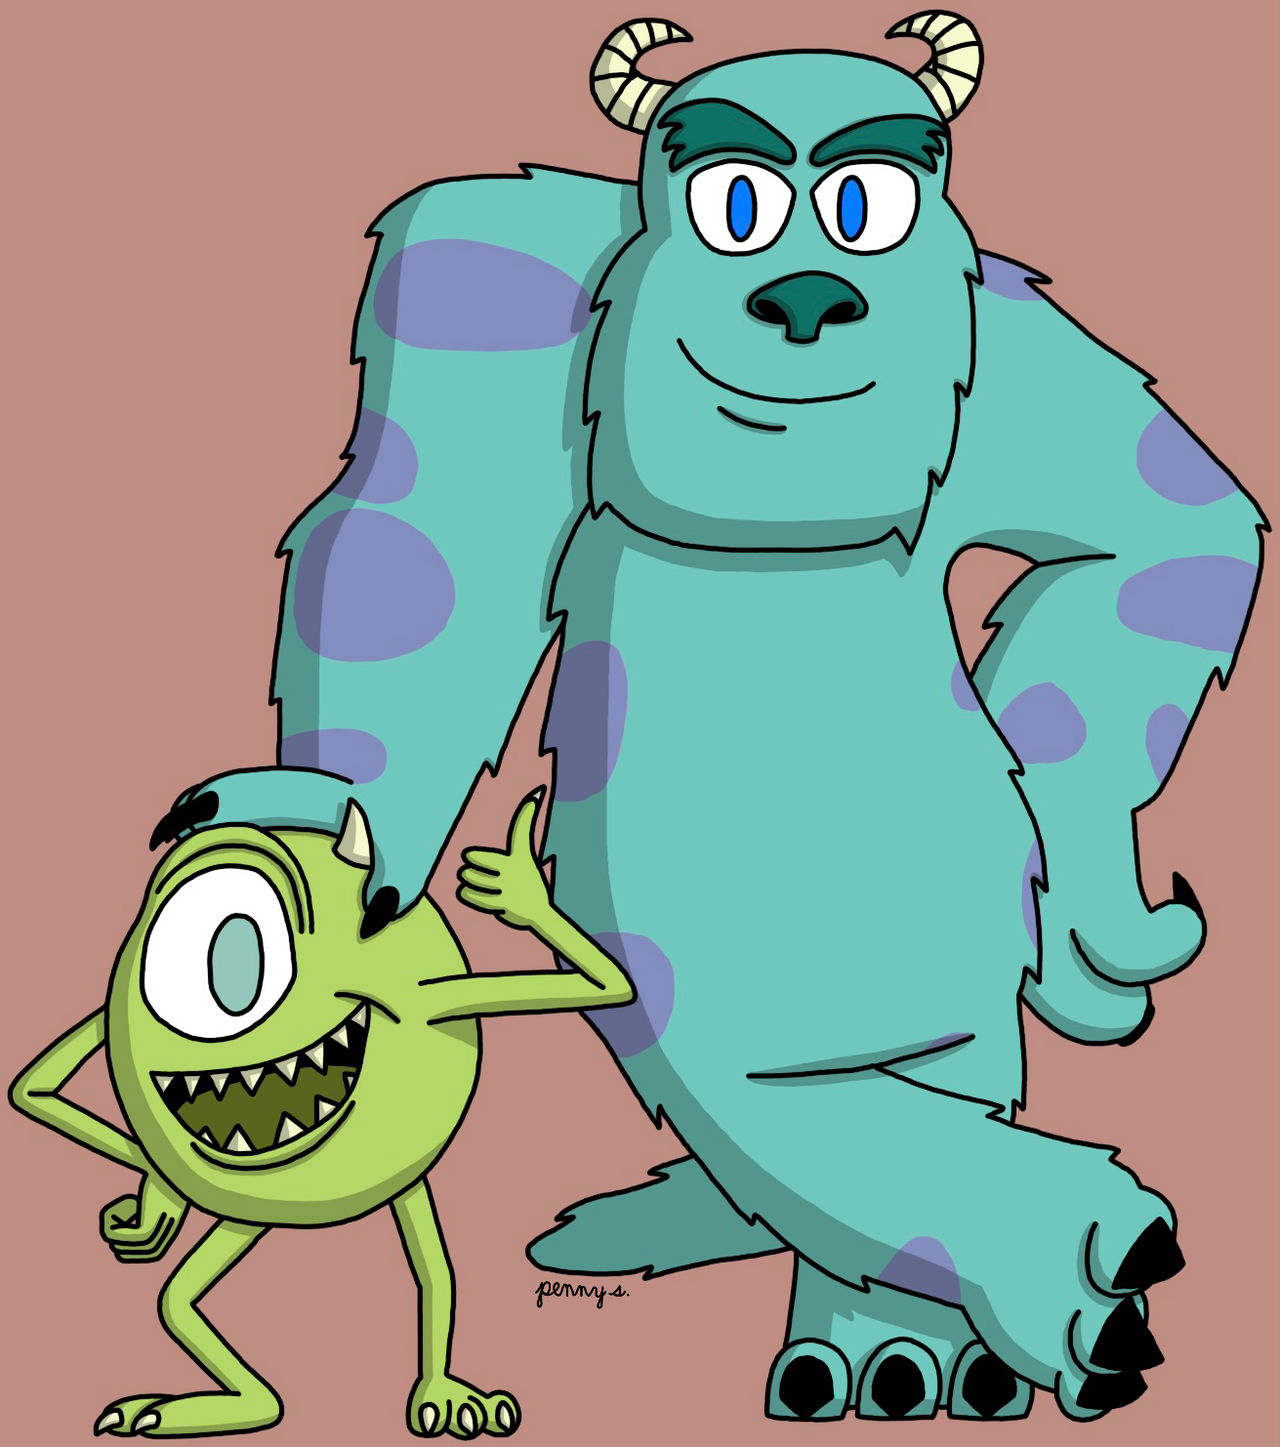 sully and mike monsters cartoon | Sticker